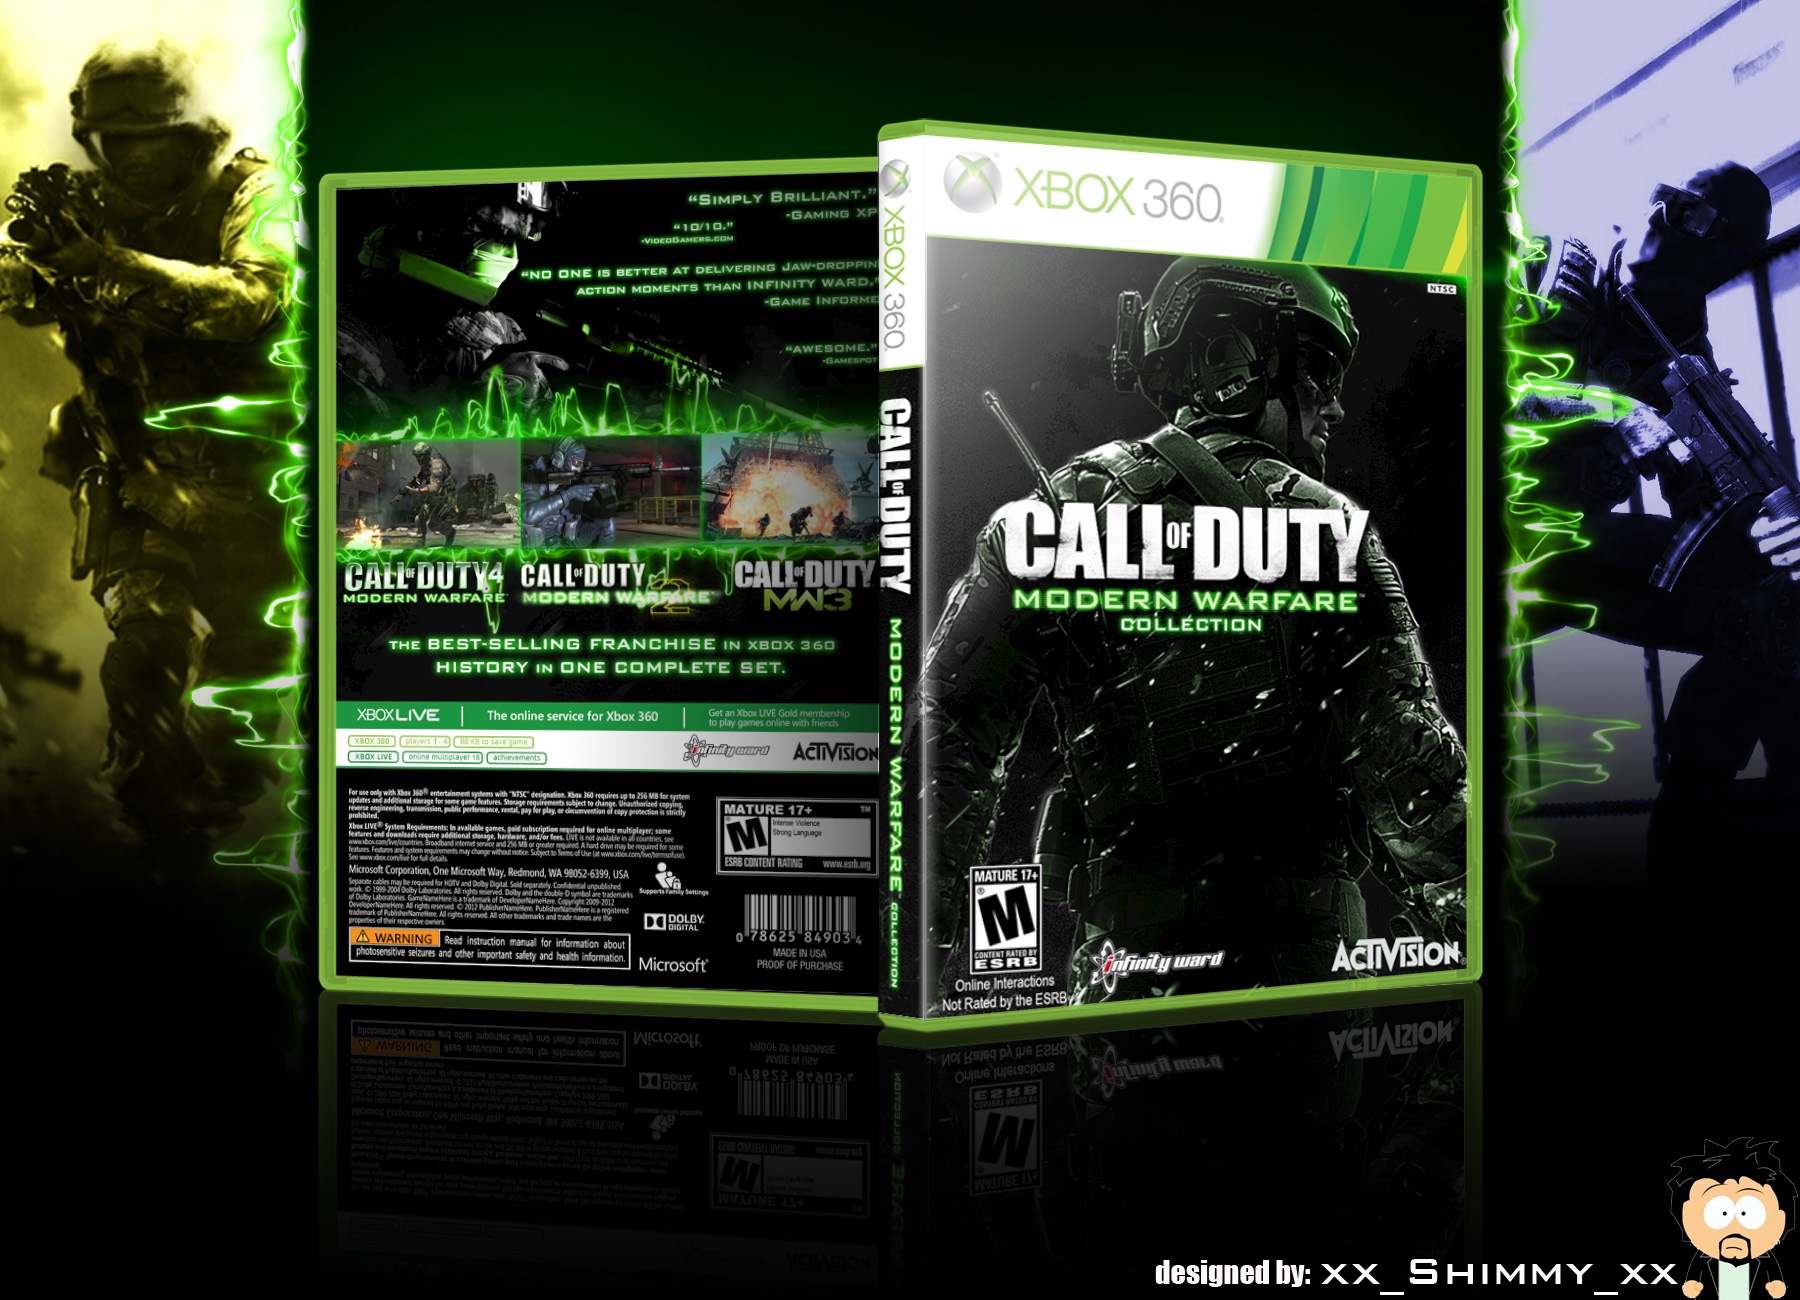 Call of Duty: Modern Warfare Collection box cover